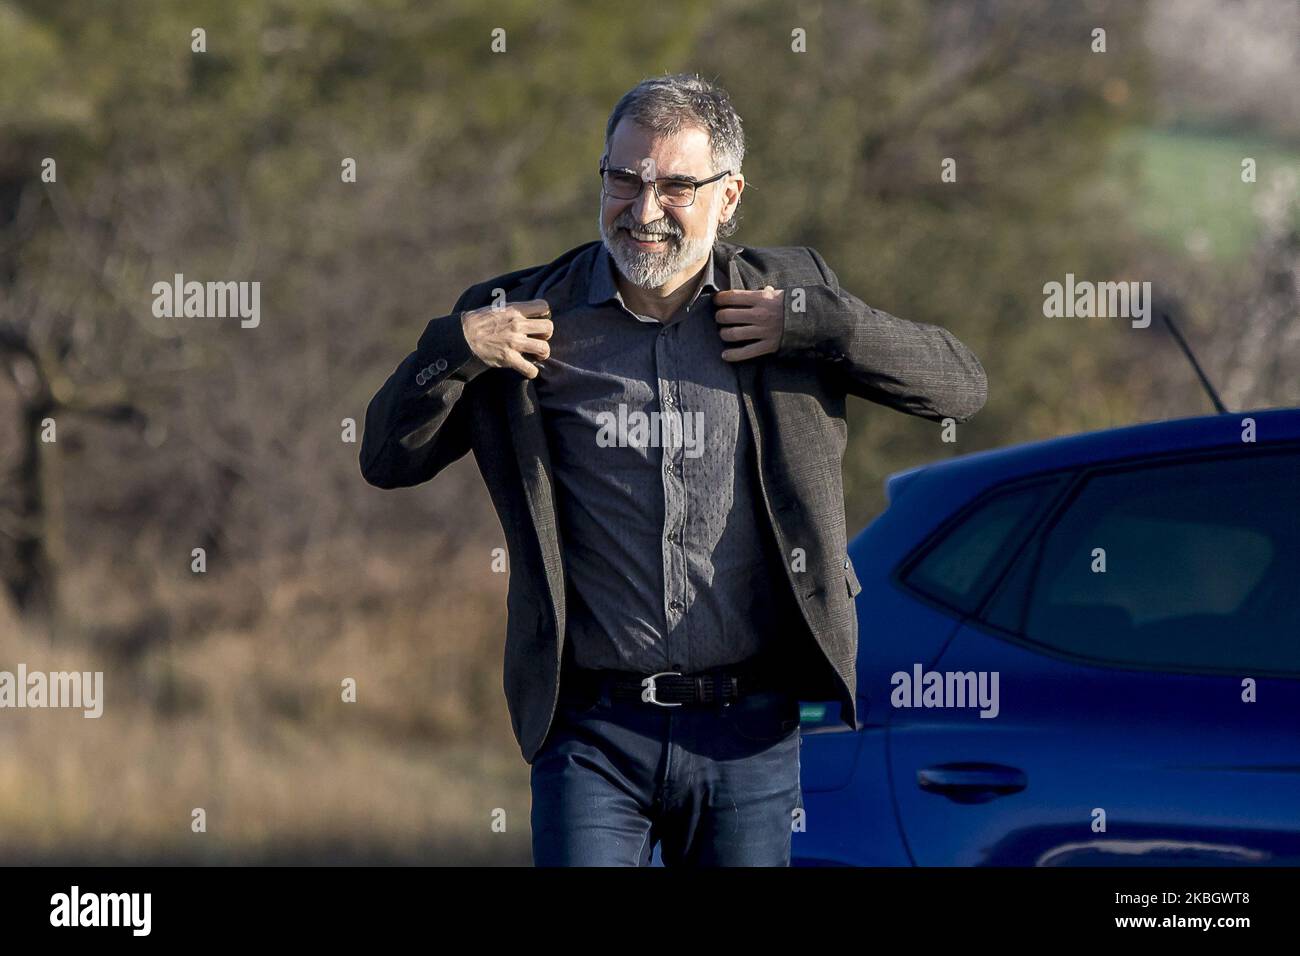 The pro-independence prisoner Jordi Cuixart arrives at his factory and is received by his workers, on the first of his labor-related leave, in Setmenat, near Barcelona, Catalonia, Spain, on February 13, 2020. (Photo by Miquel Llop/NurPhoto) Stock Photo